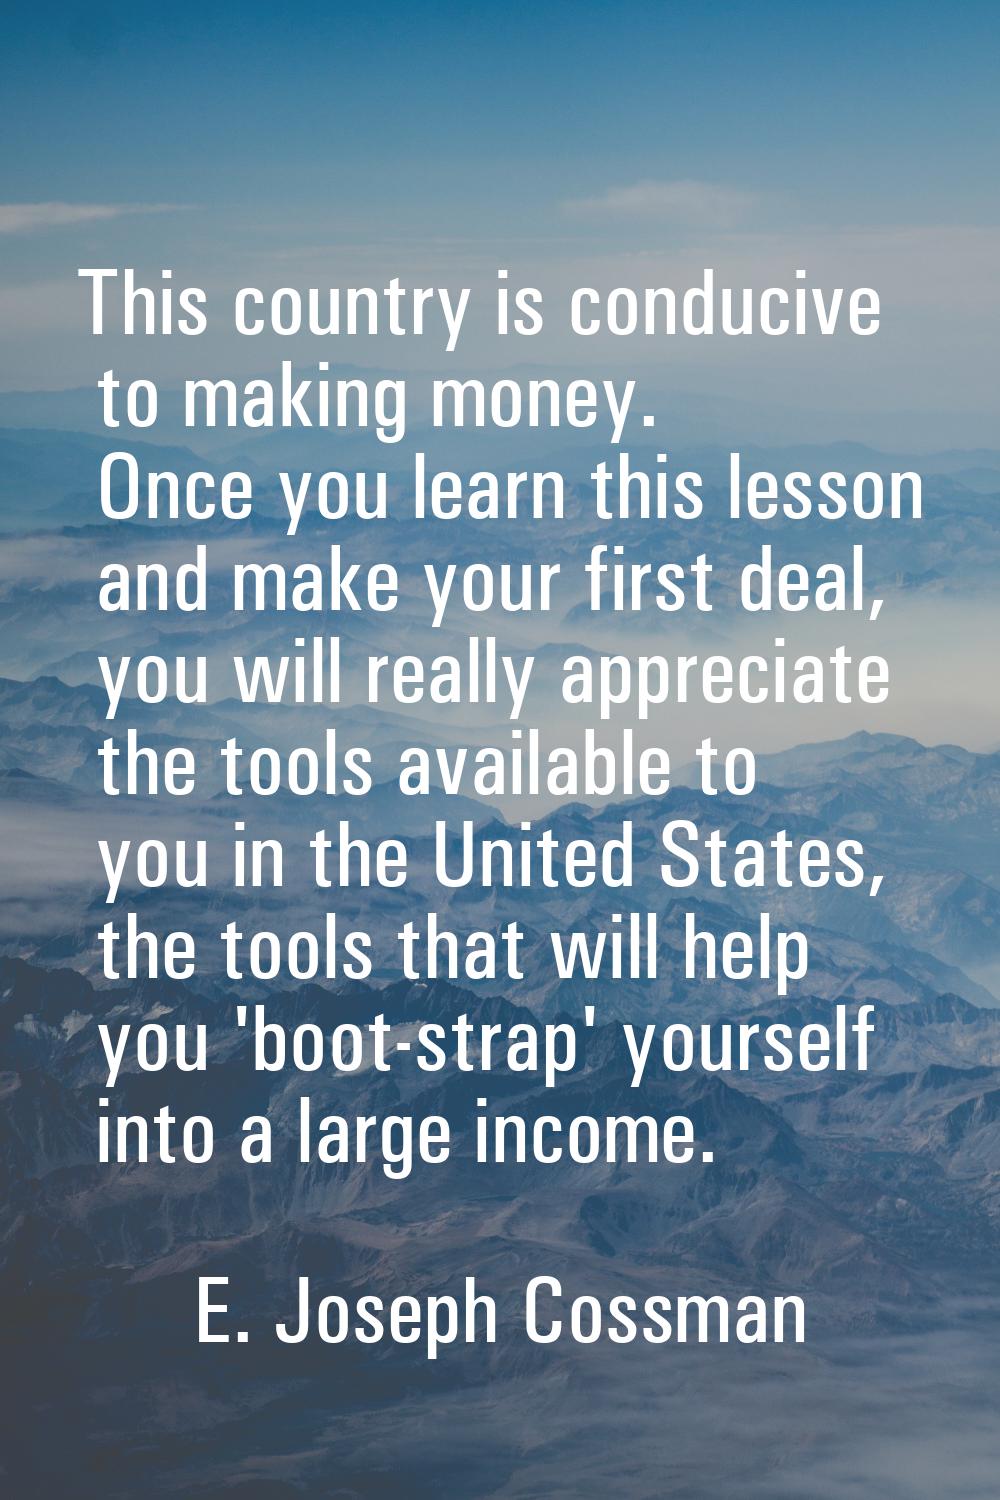 This country is conducive to making money. Once you learn this lesson and make your first deal, you